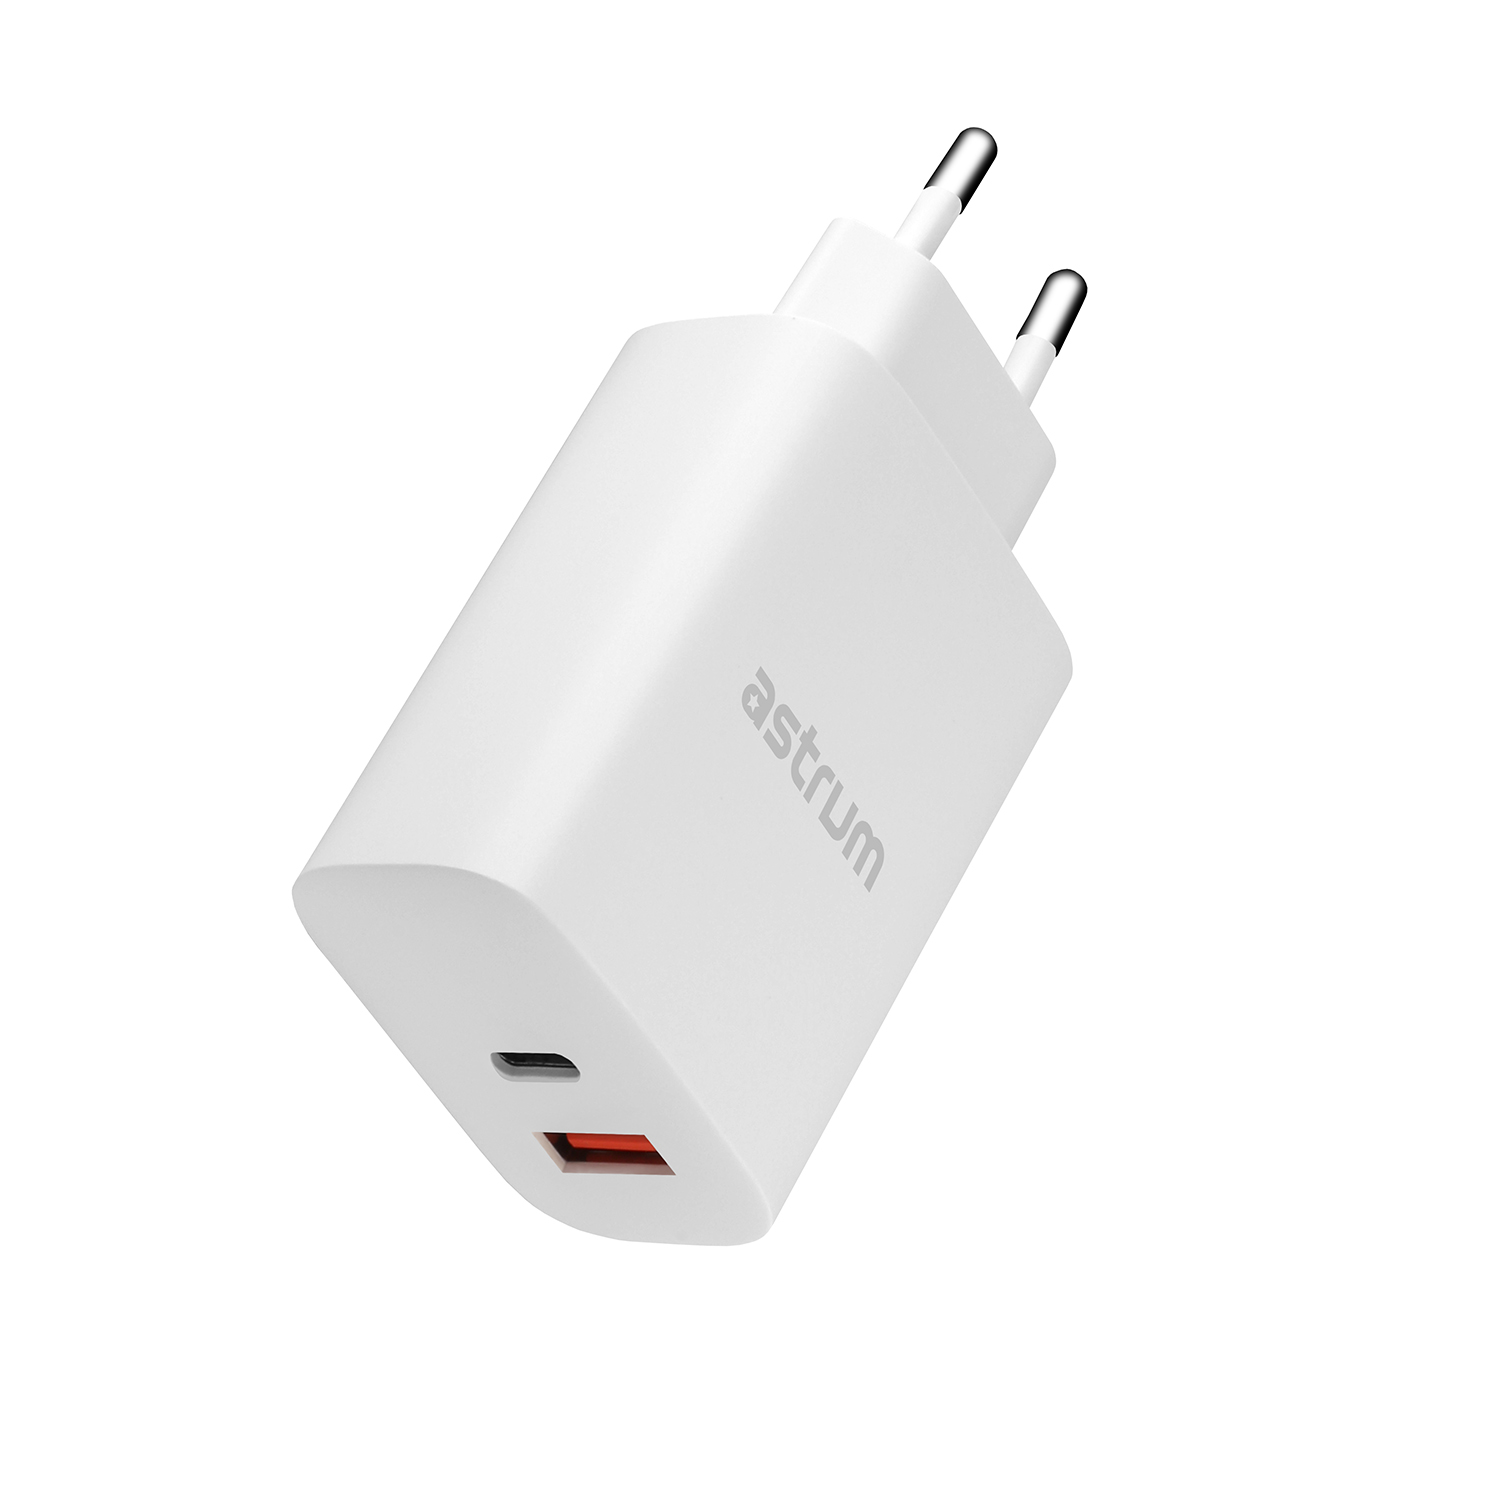 Pro Dual PD65 PD65W Dual USB Travel Wall Charger